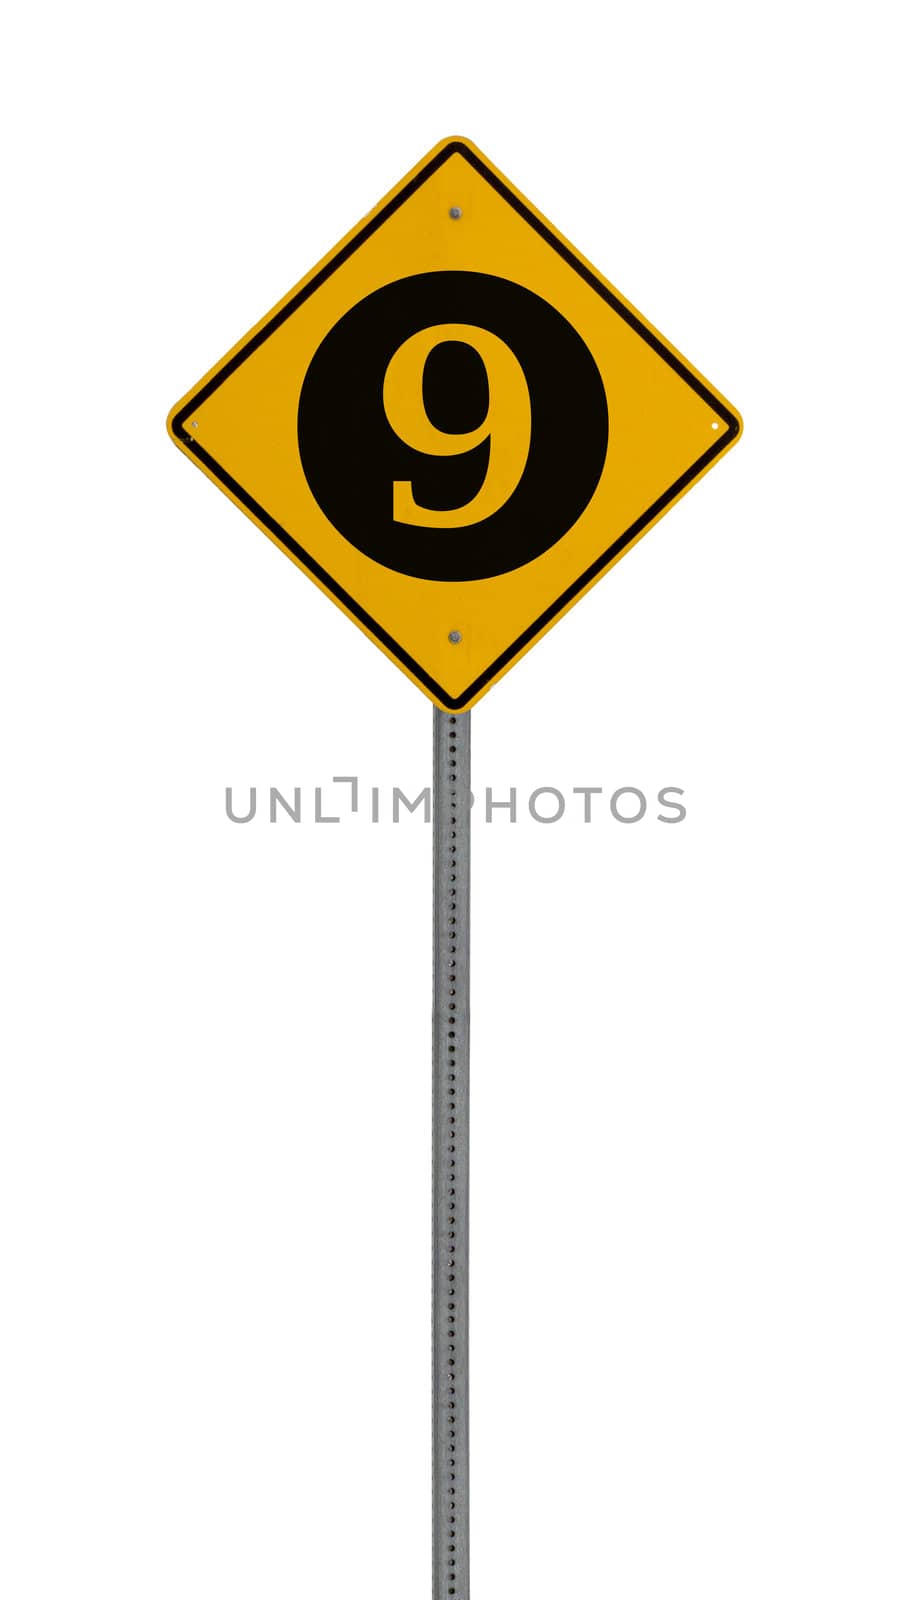 A yellow road warning sign isolated on white. Includes clipping path.